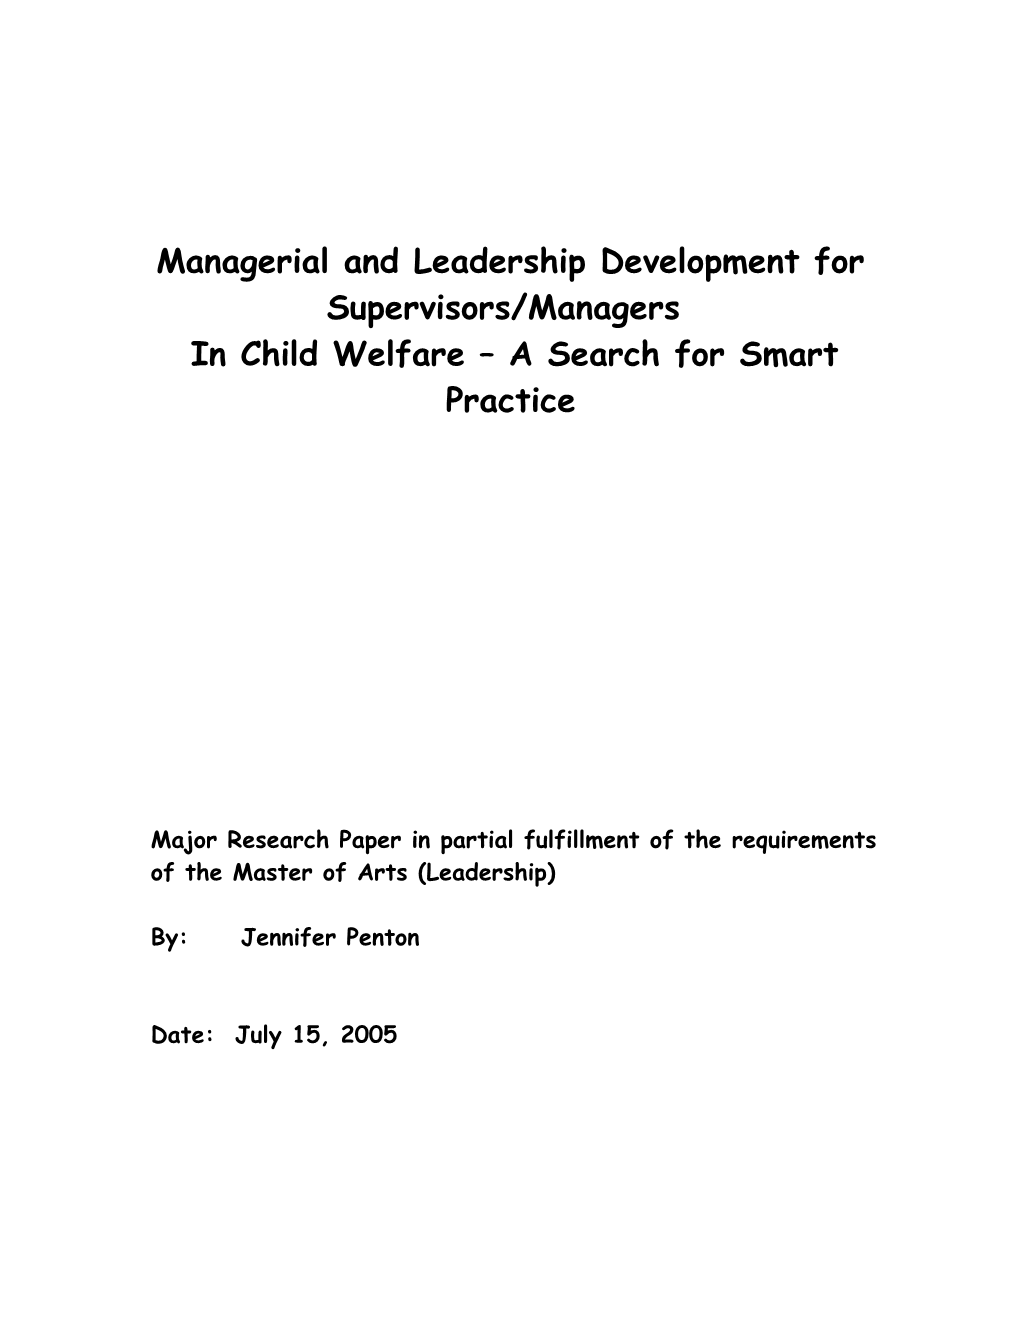 Managerial and Leadership Development for Supervisors/Managers